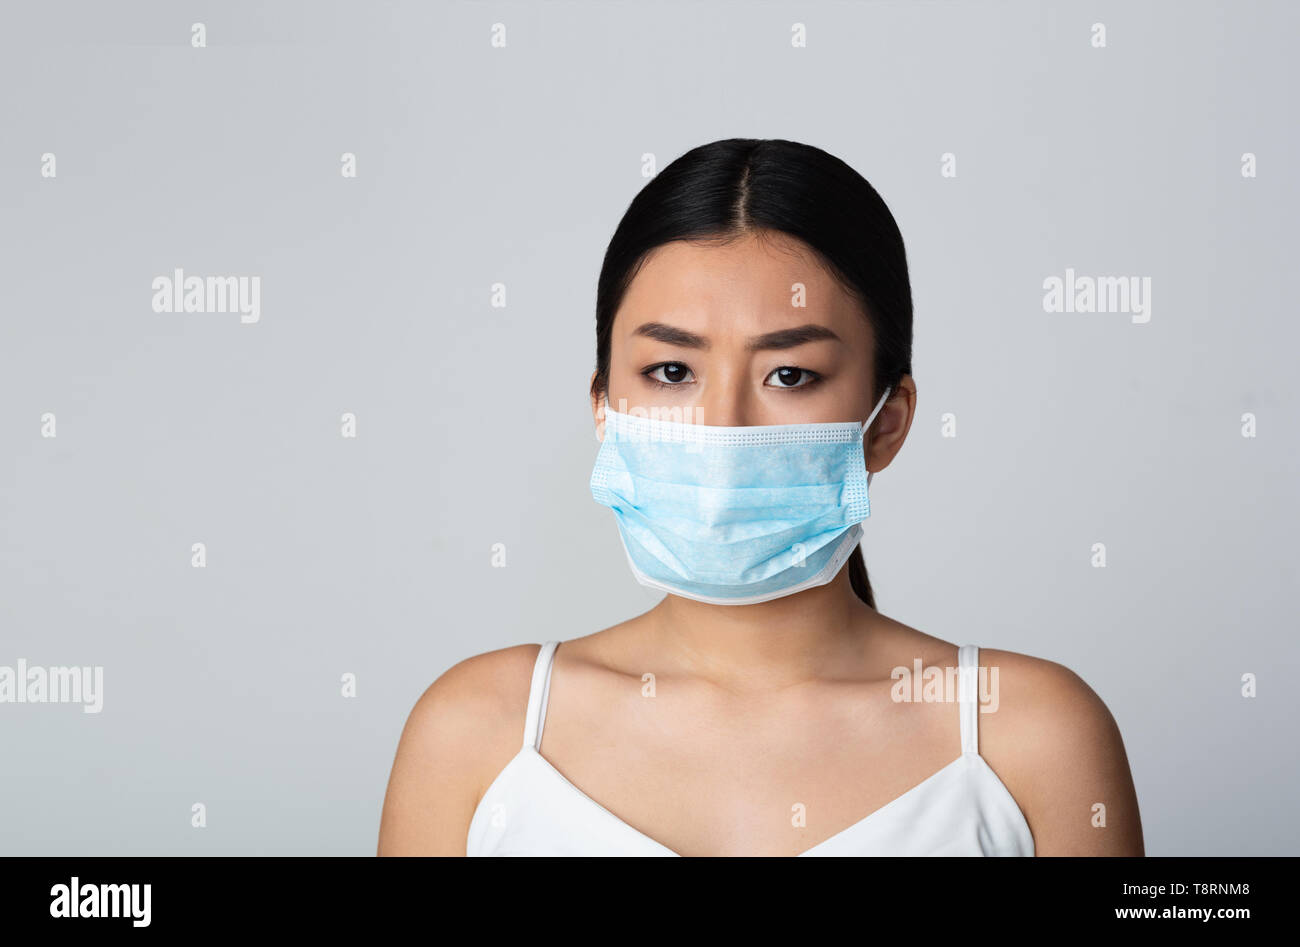 Air Pollution Concept. Girl Wearing Face Protective Mask Stock Photo